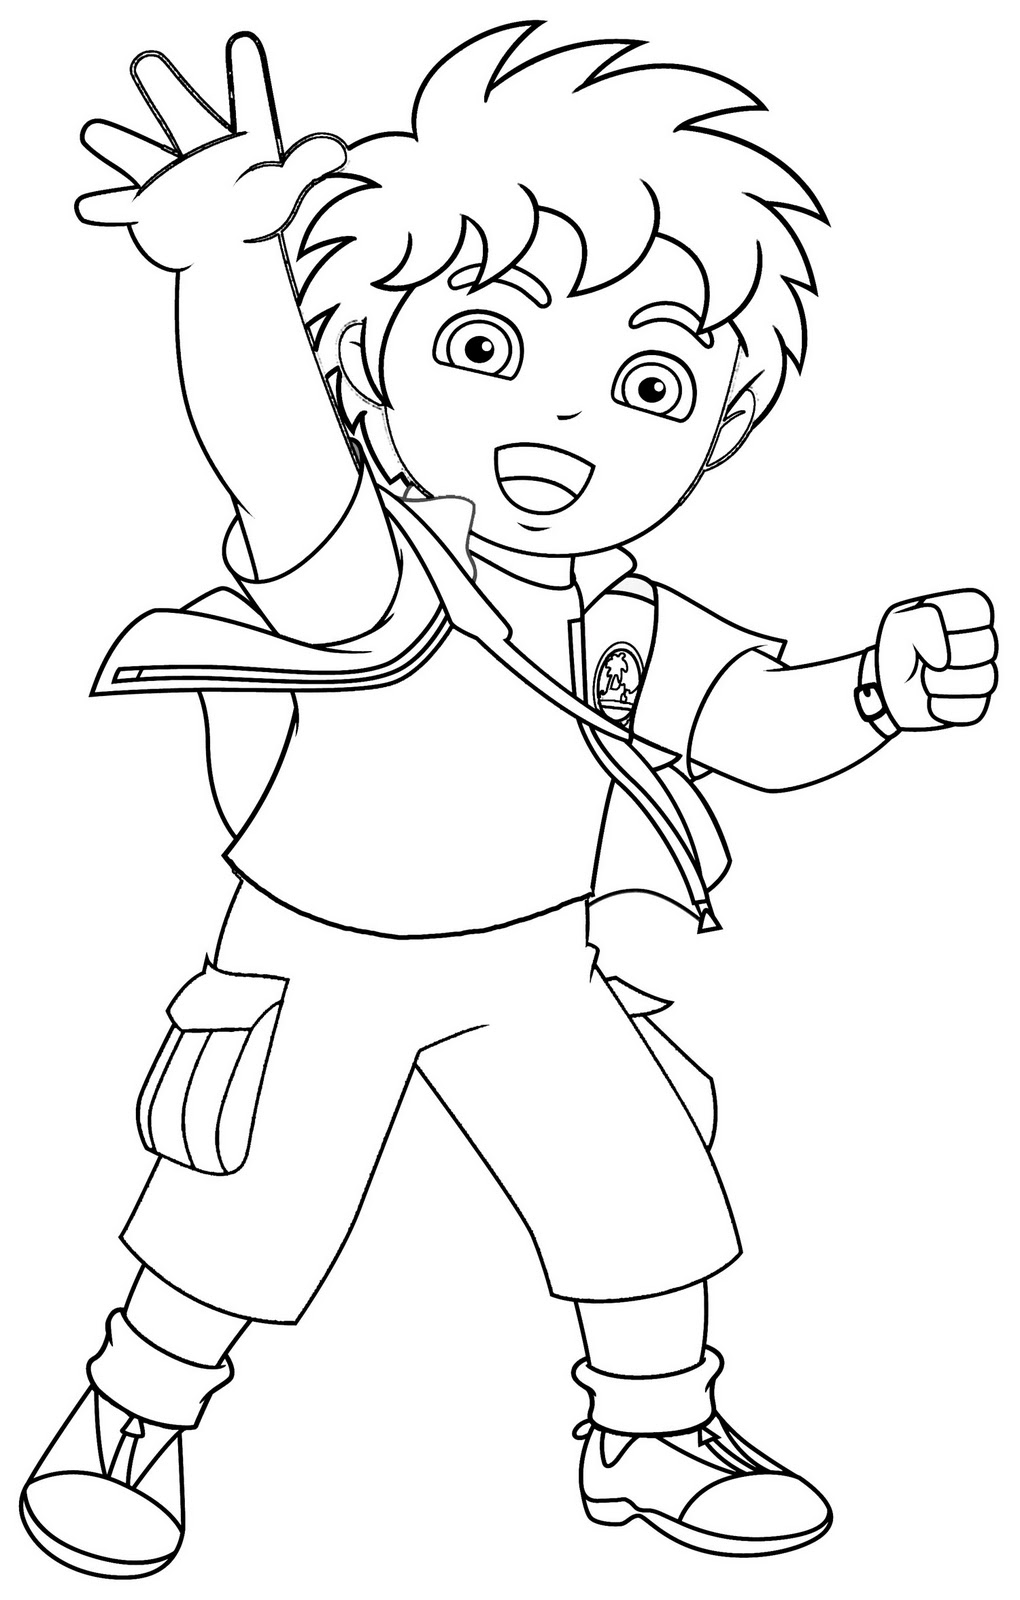 Diego Halloween Coloring Pages